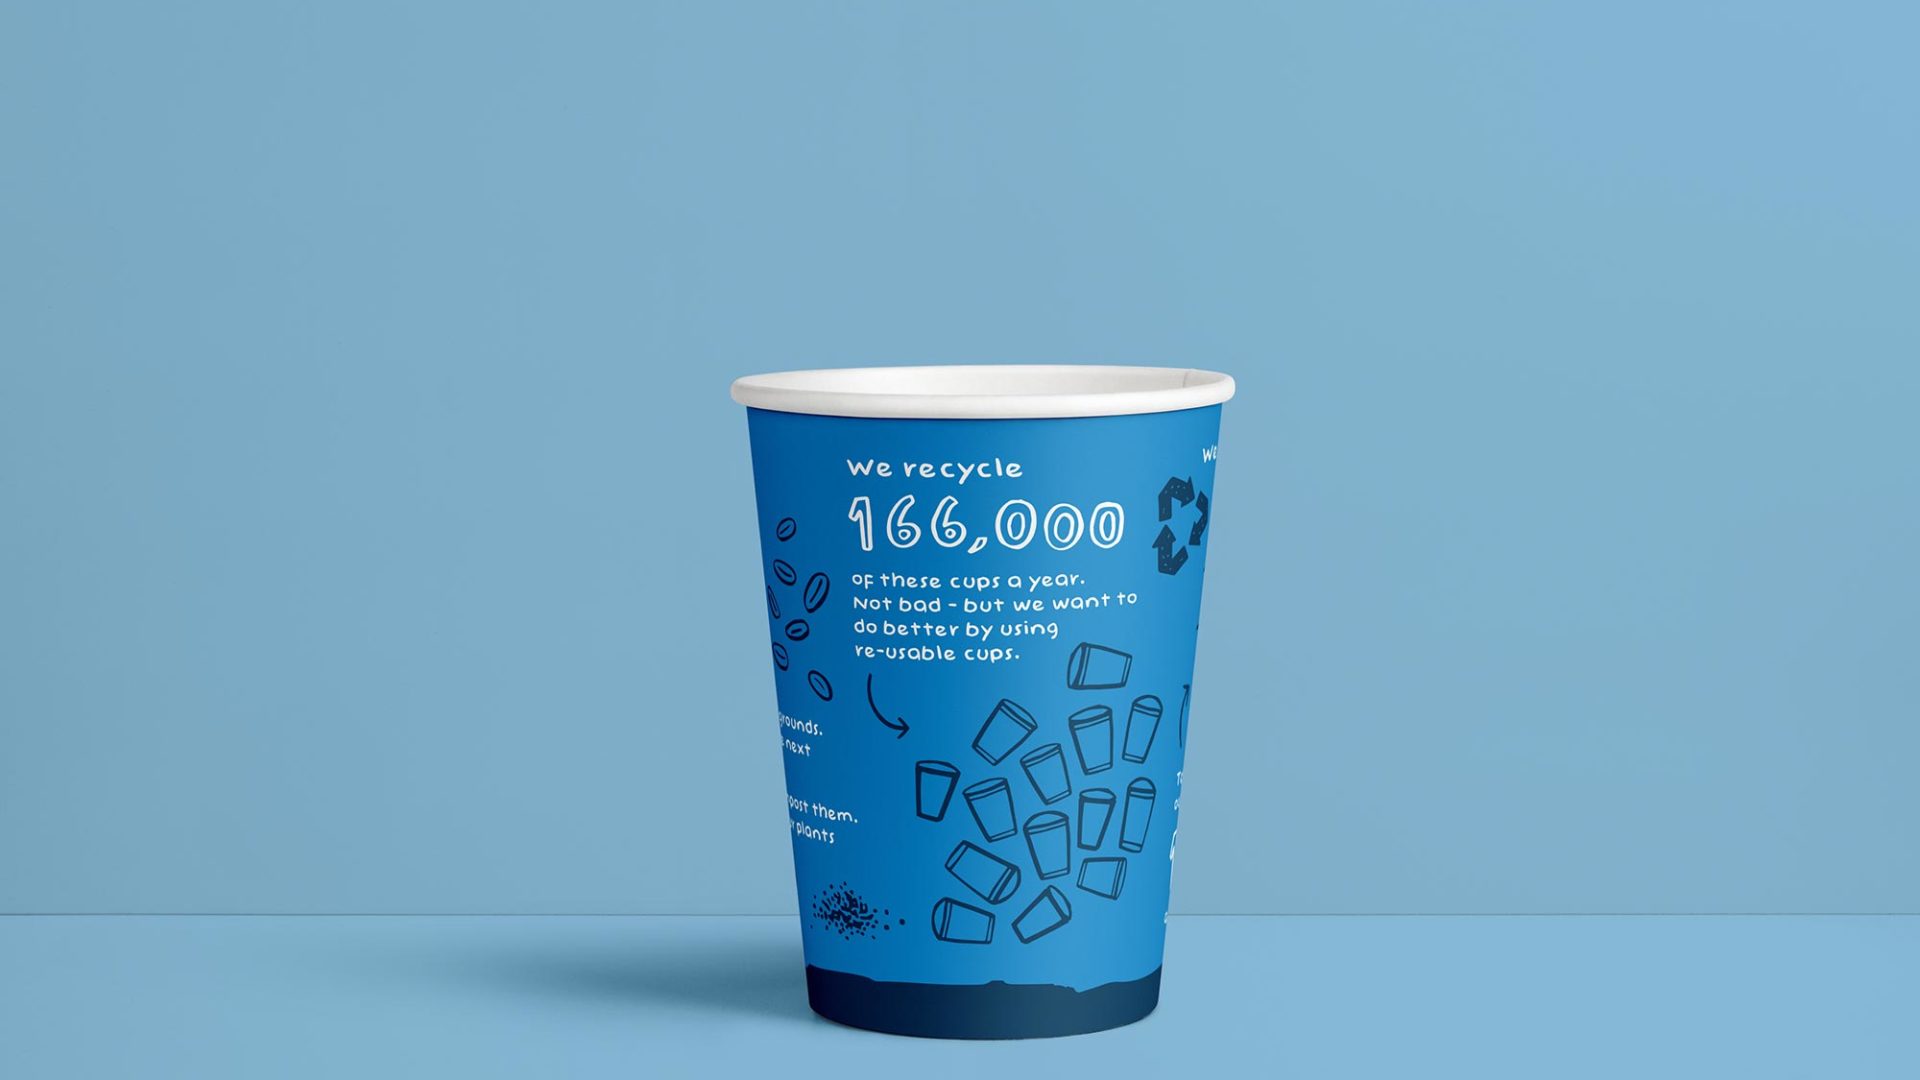 Recyclable coffee cup